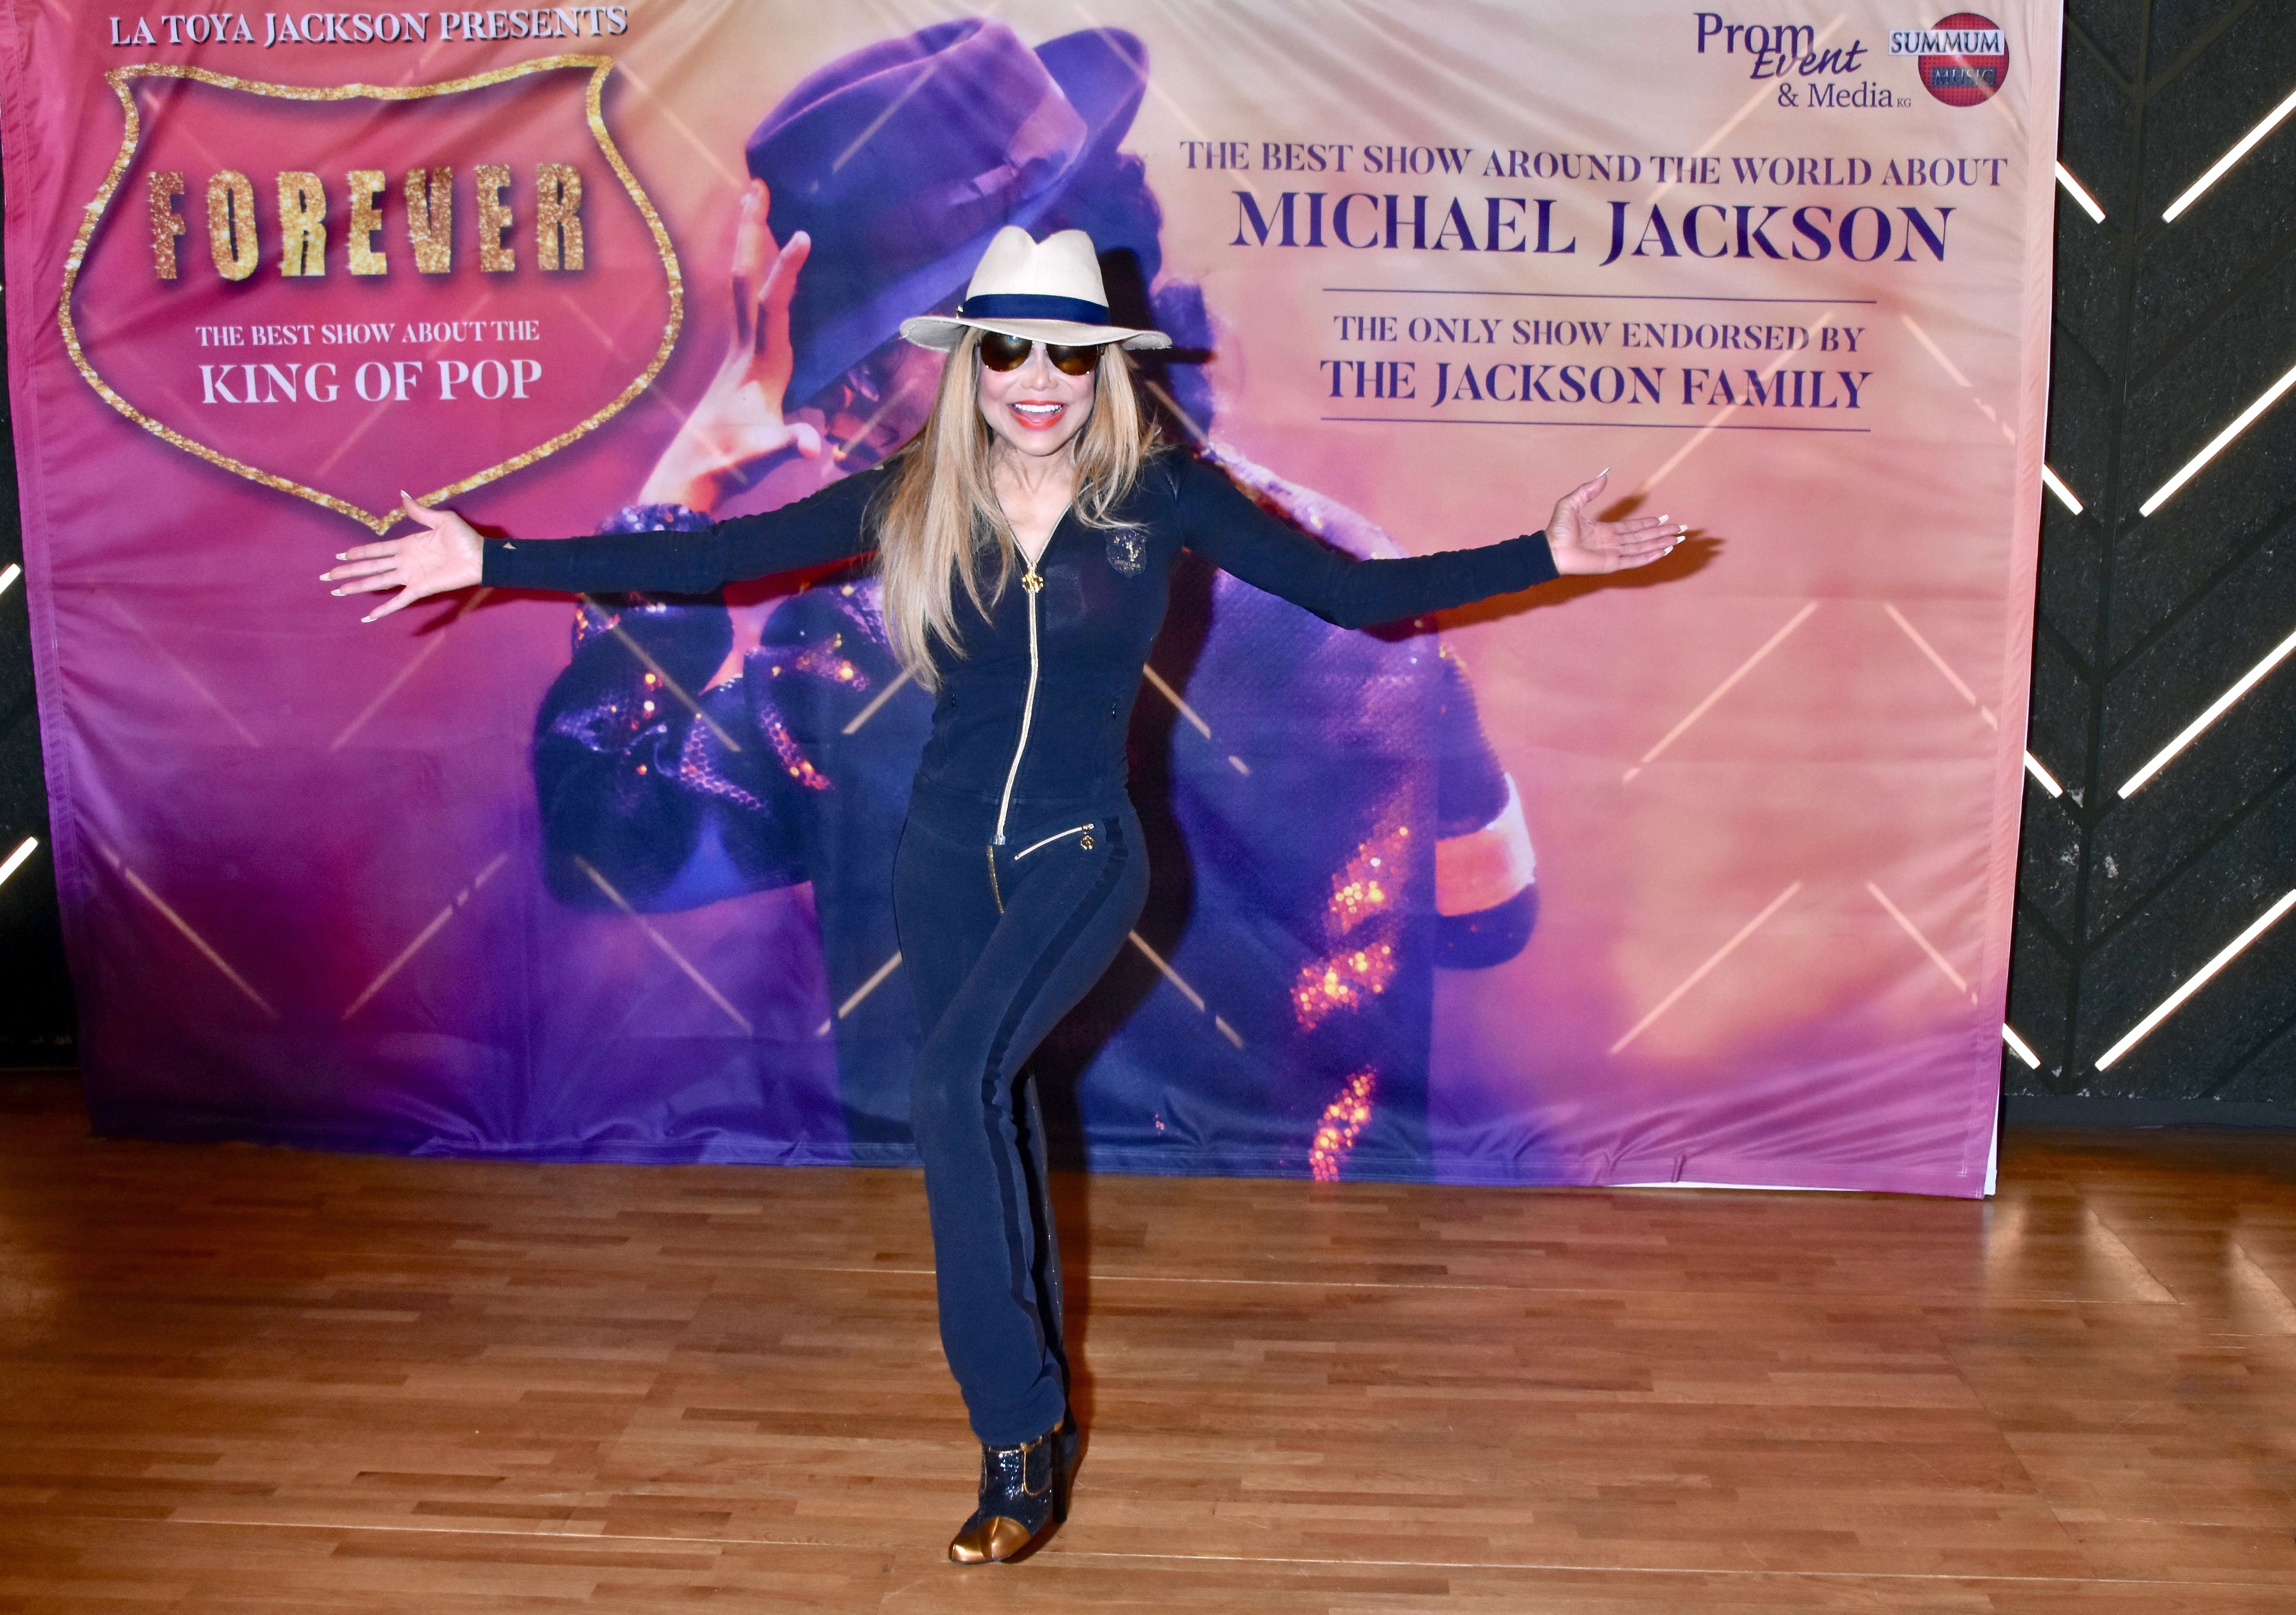 LaToya Jackson during the "Forever - King Of Pop" press conference at Verti Music Hall on November 18, 2019 in Berlin, Germany | Photo: GettyImages